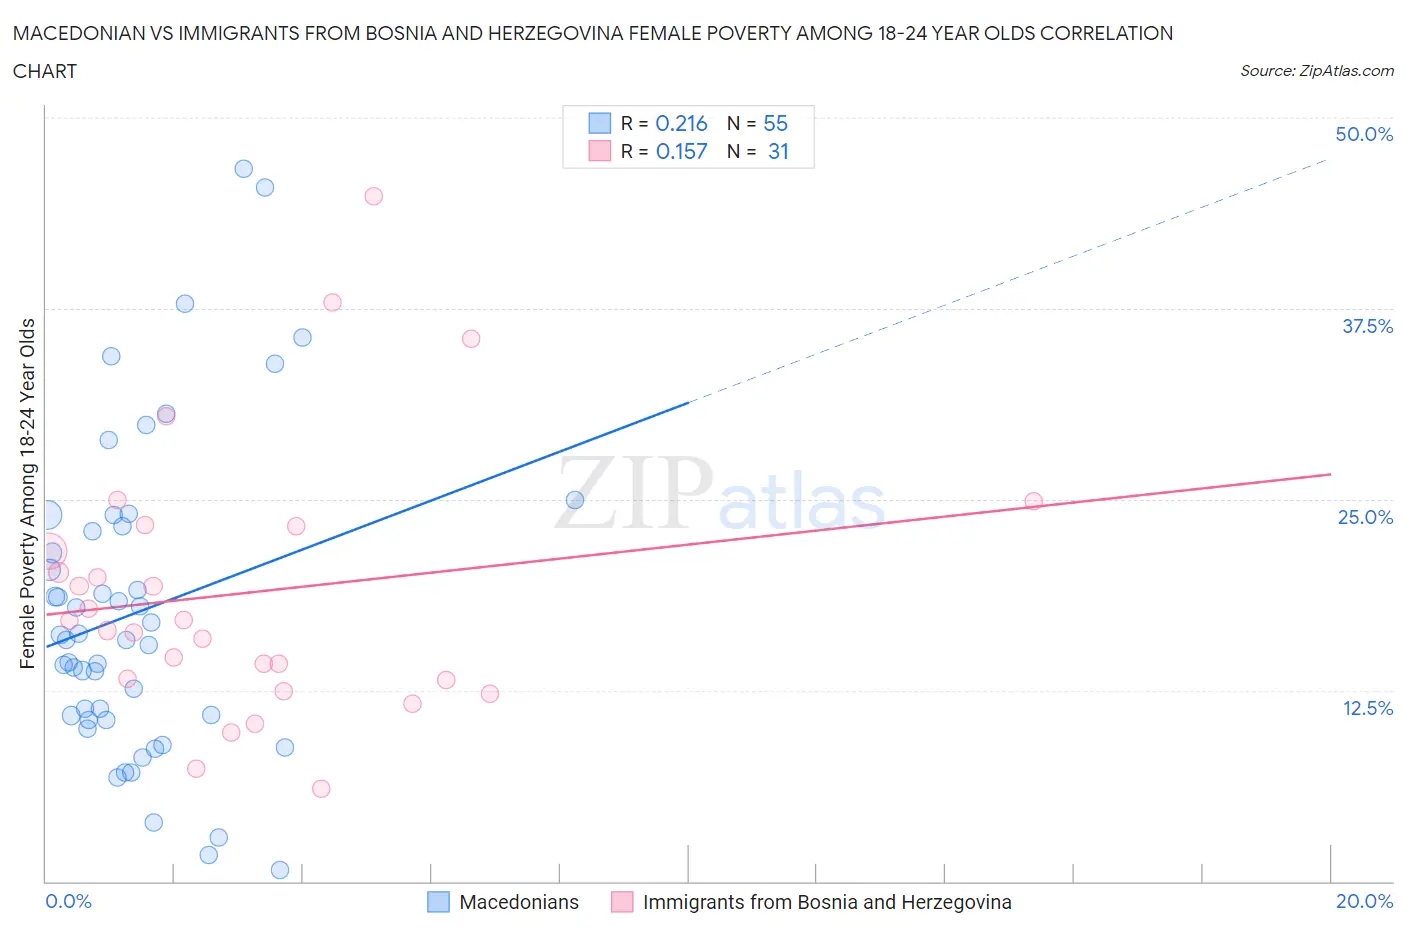 Macedonian vs Immigrants from Bosnia and Herzegovina Female Poverty Among 18-24 Year Olds